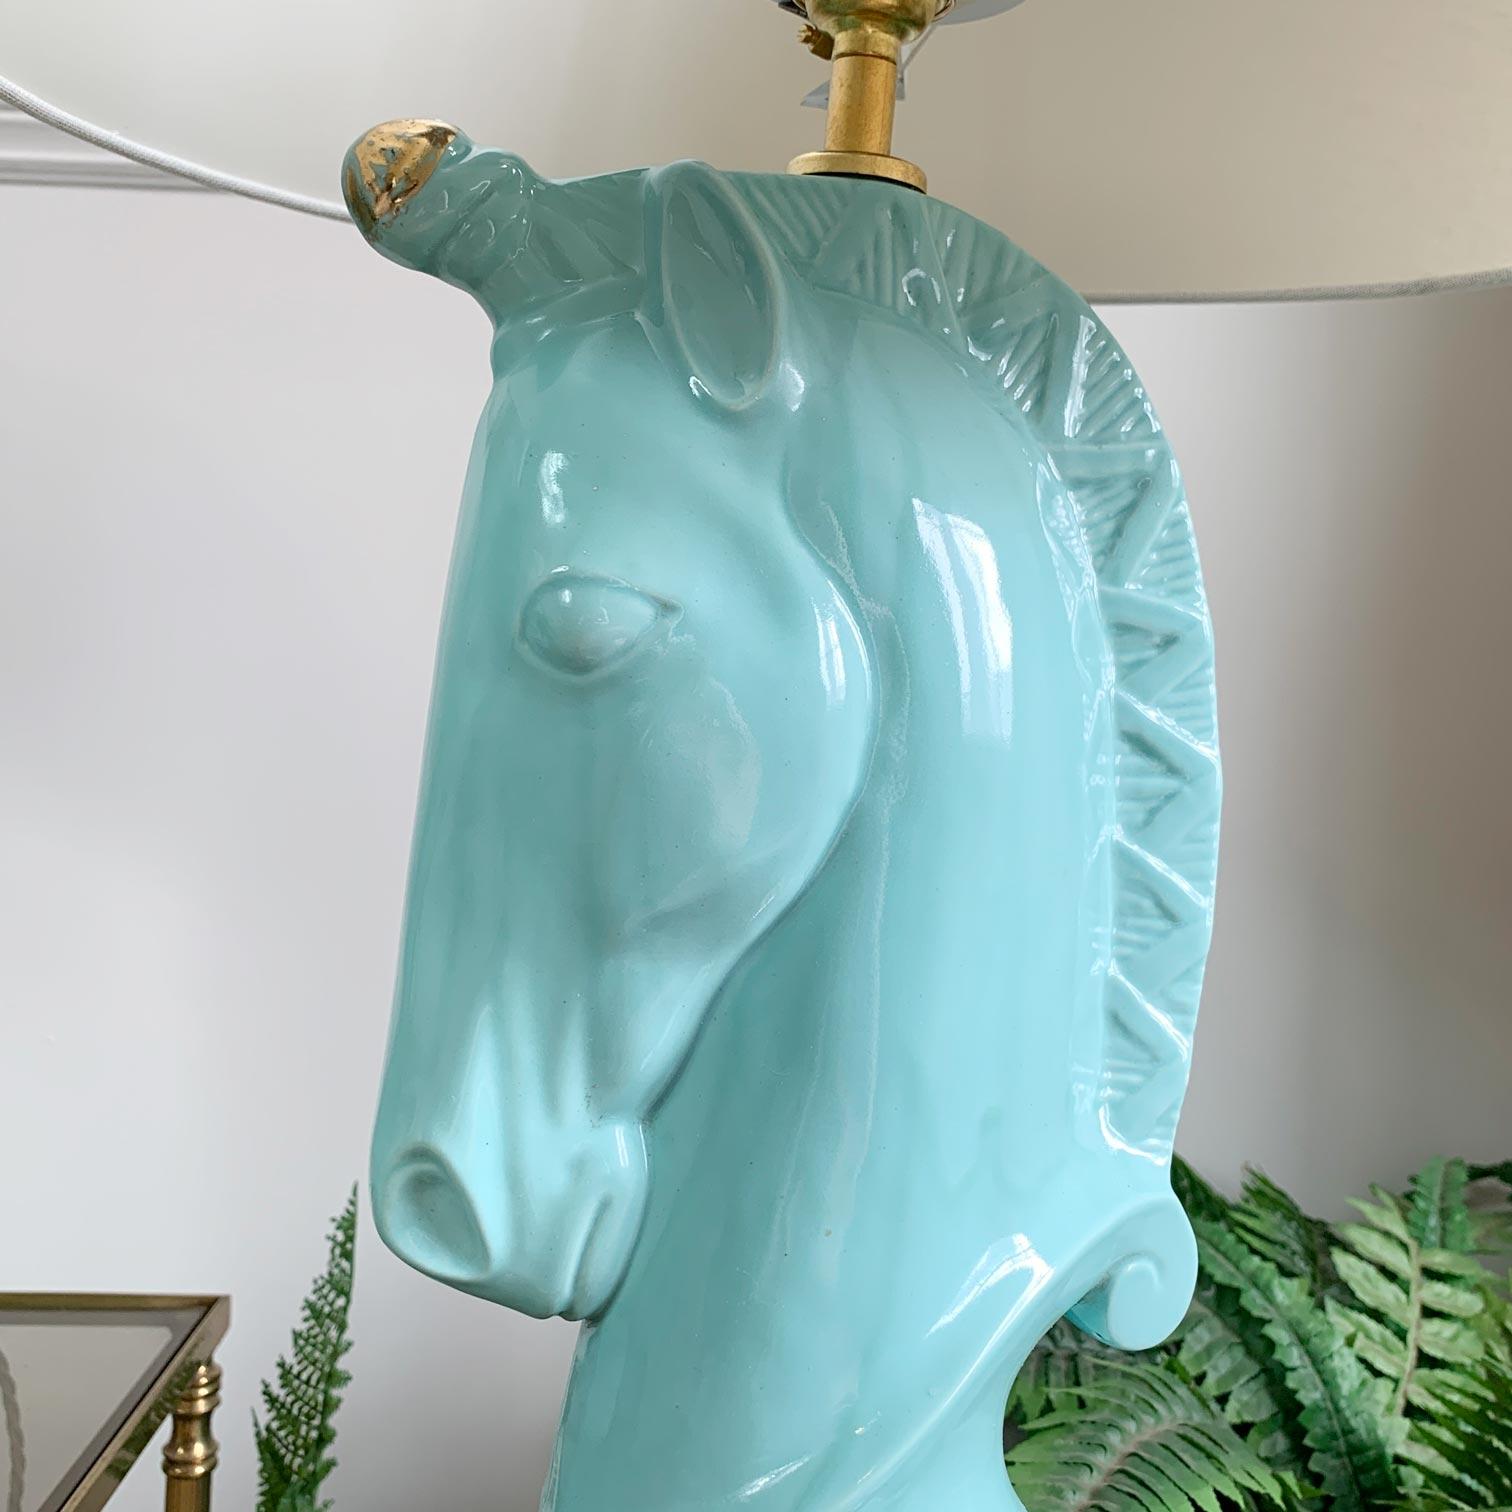 Pair of 1950’s Turquoise Blue Howell Ceramic Unicorn Lamps For Sale 4